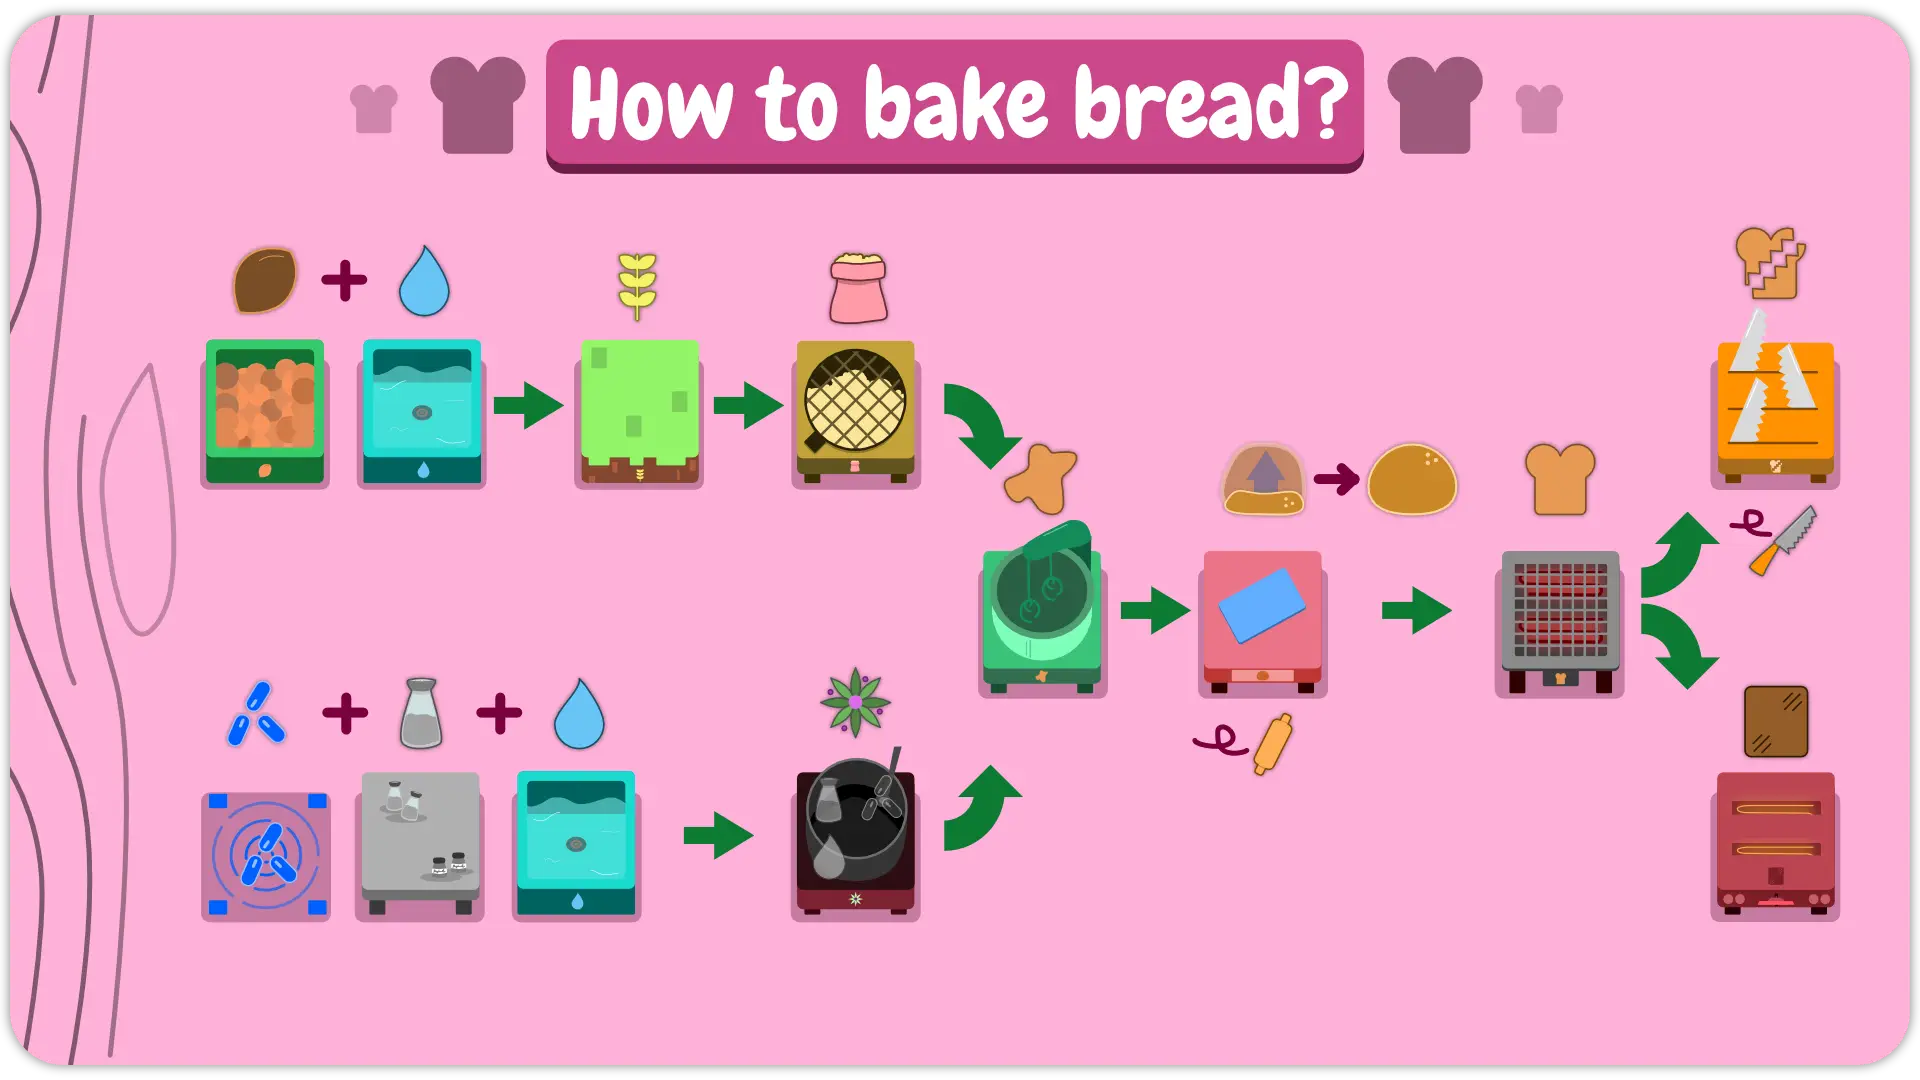 Overview of How to Bake Bread